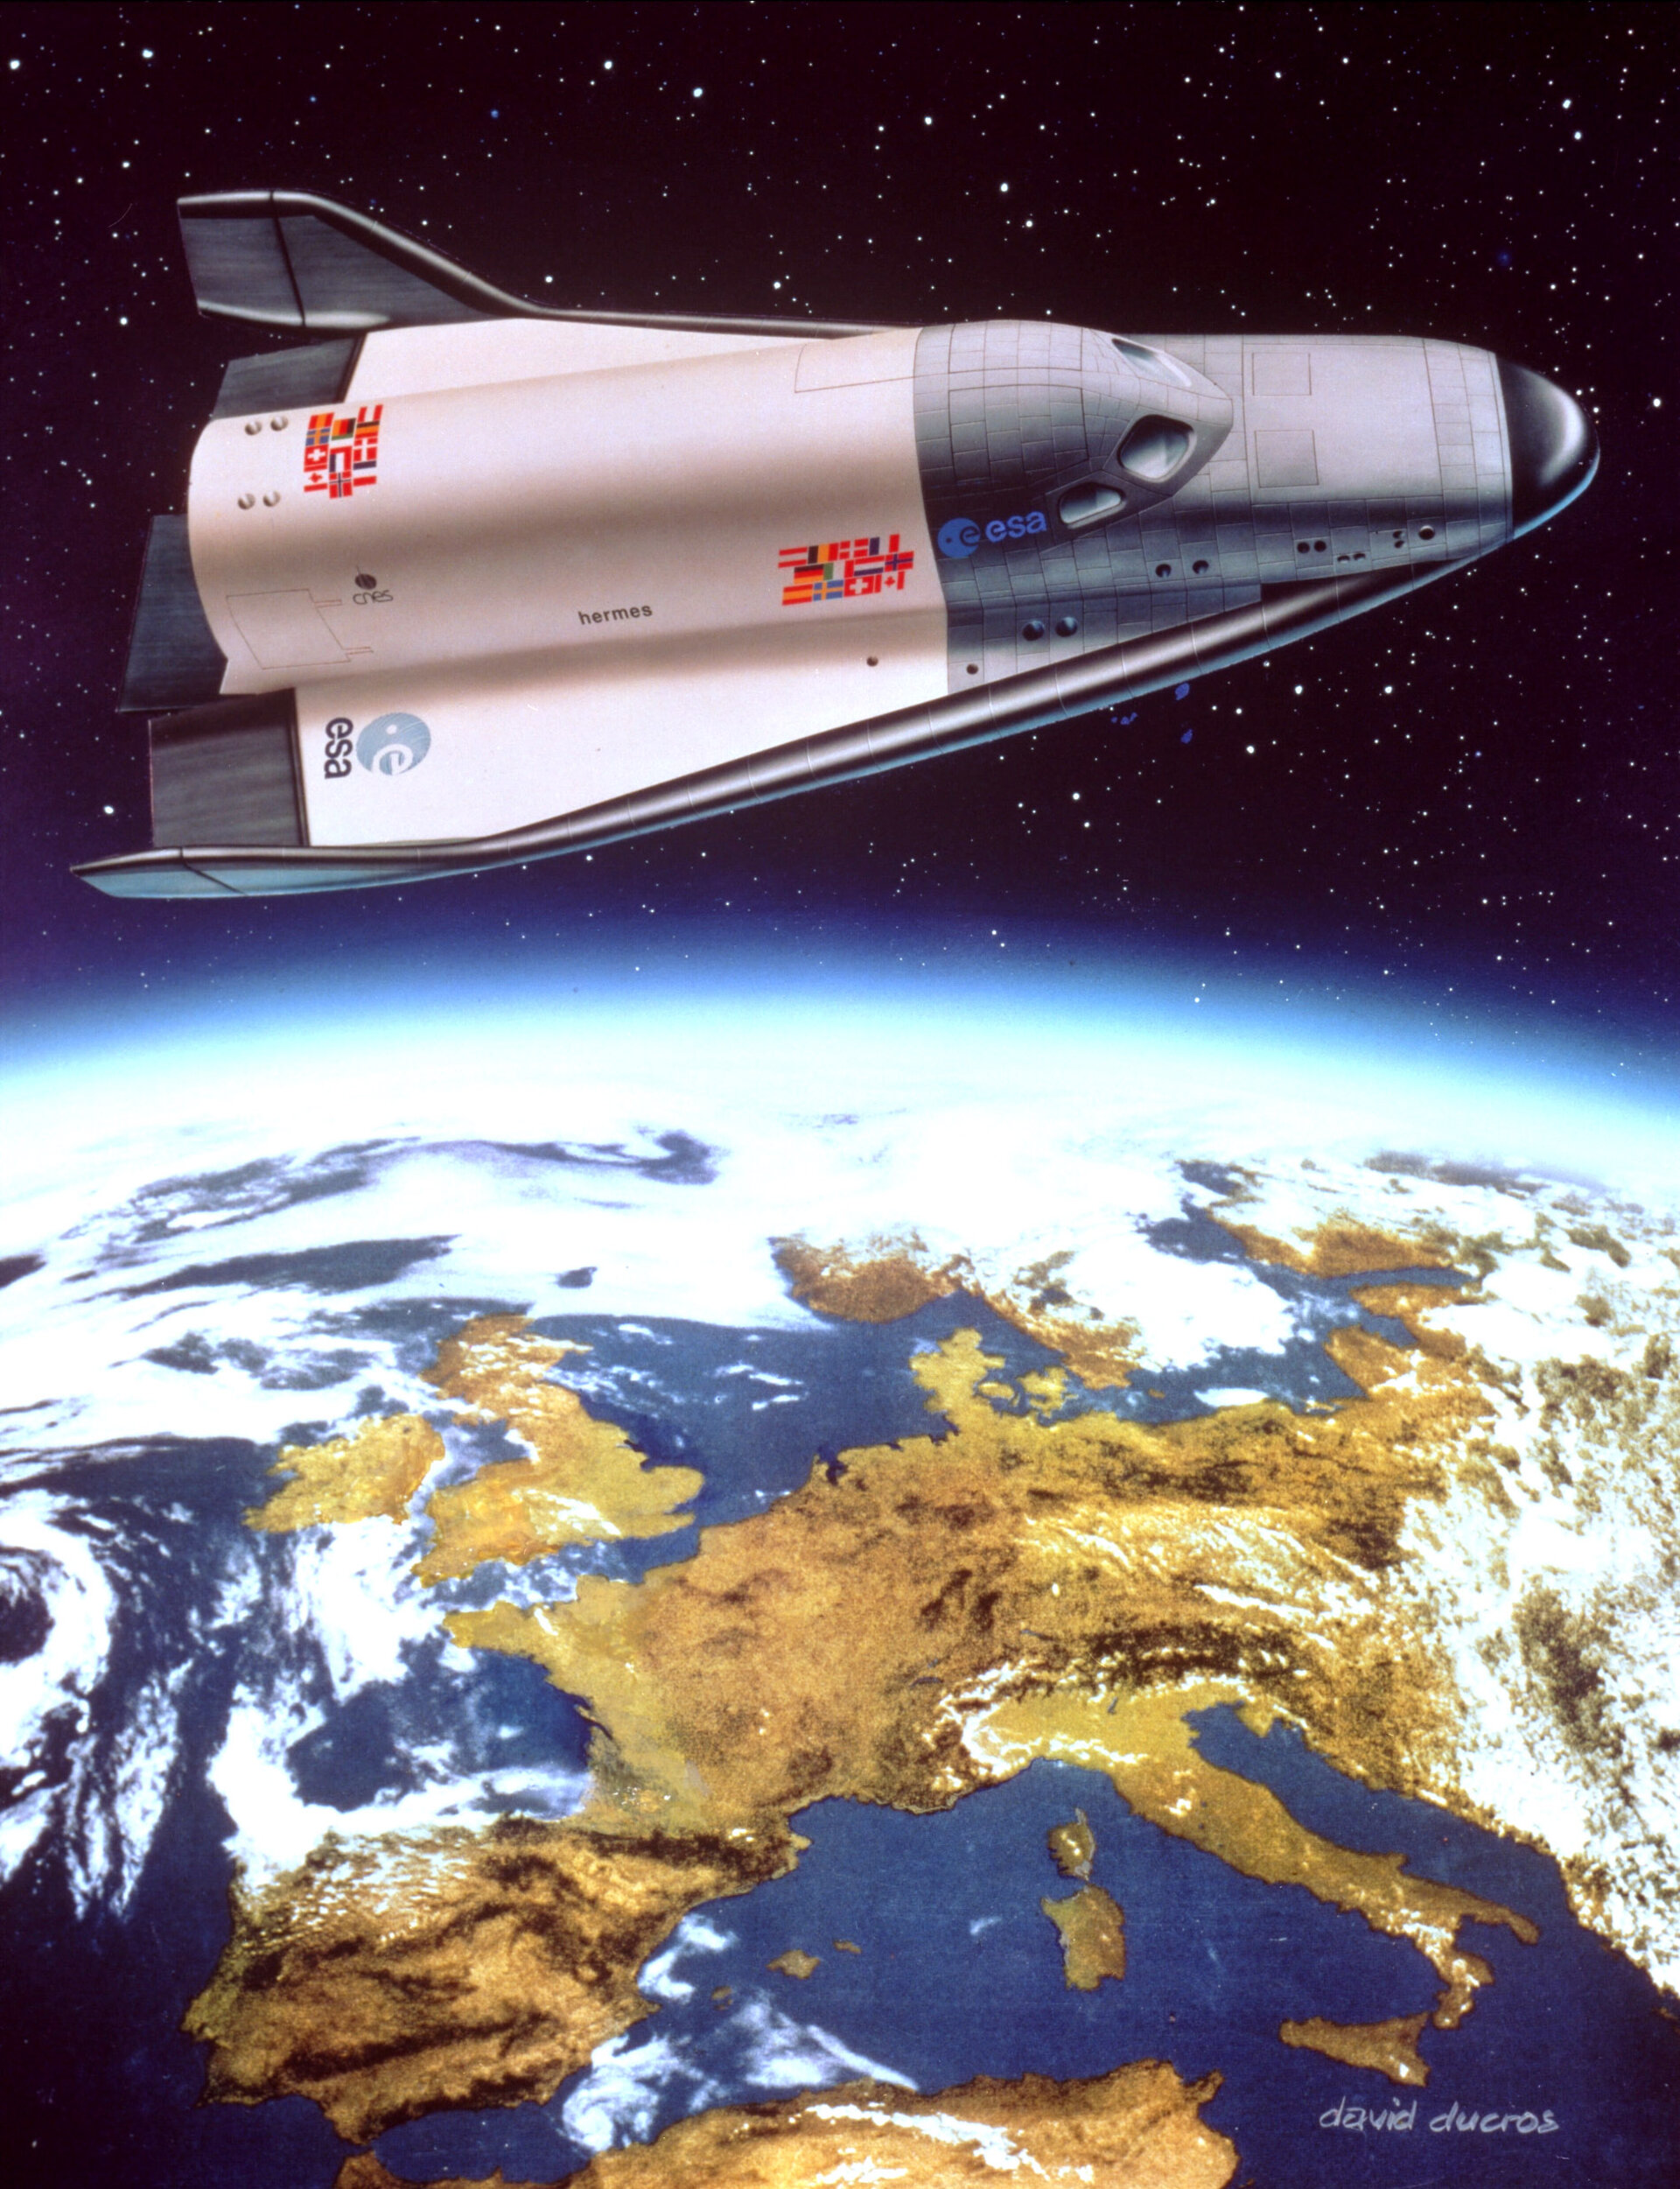 Hermes, 1987: concept for a European manned spaceplane